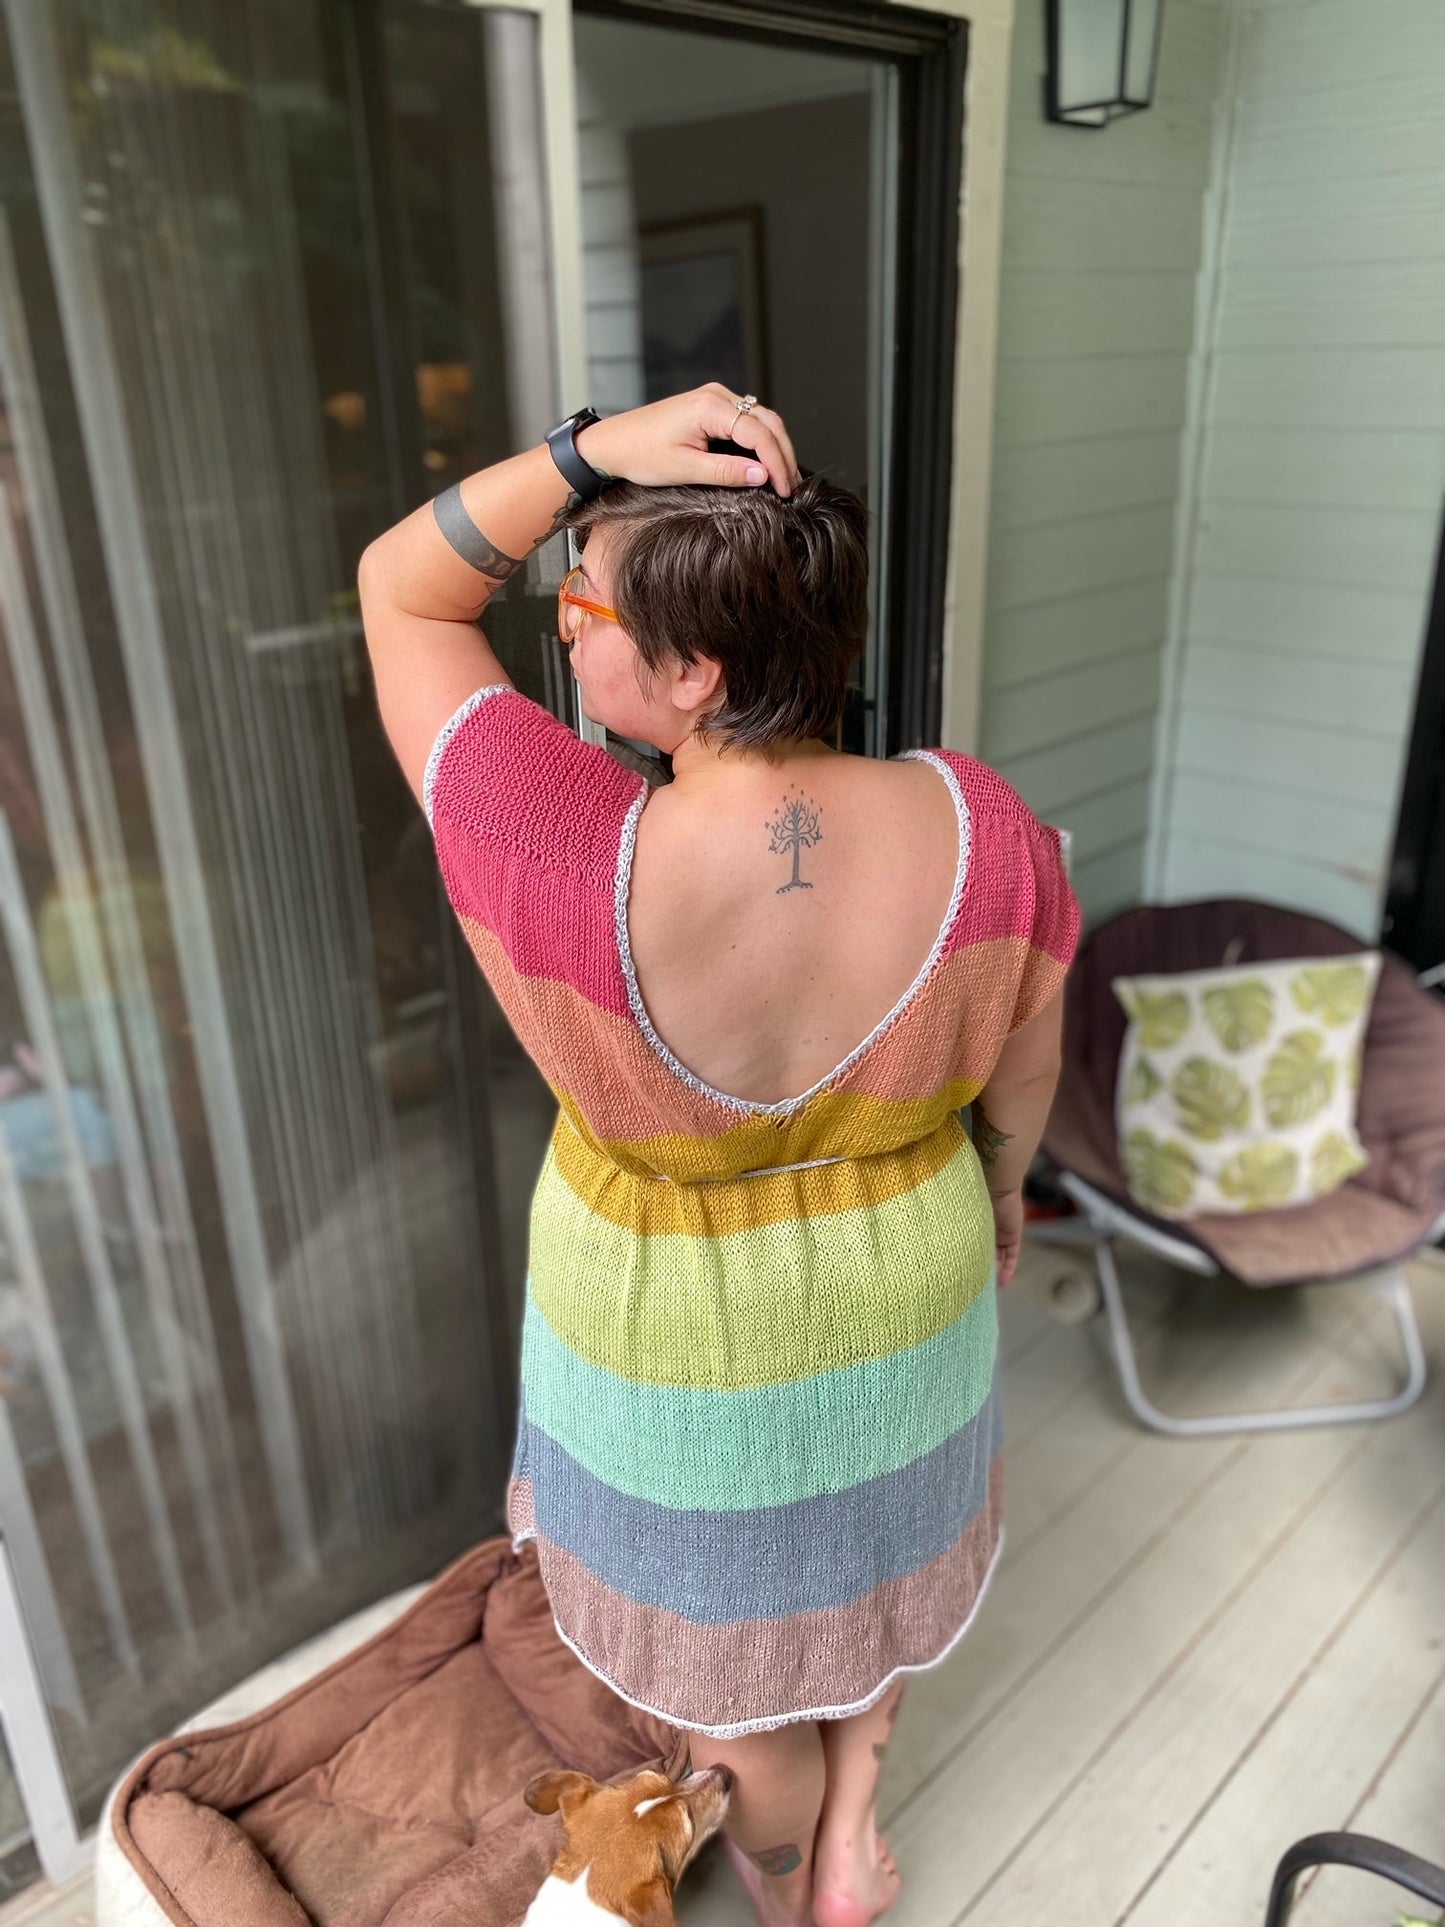 Seen from behind, a person wears a handmade dress, knit using rainbow yarn.